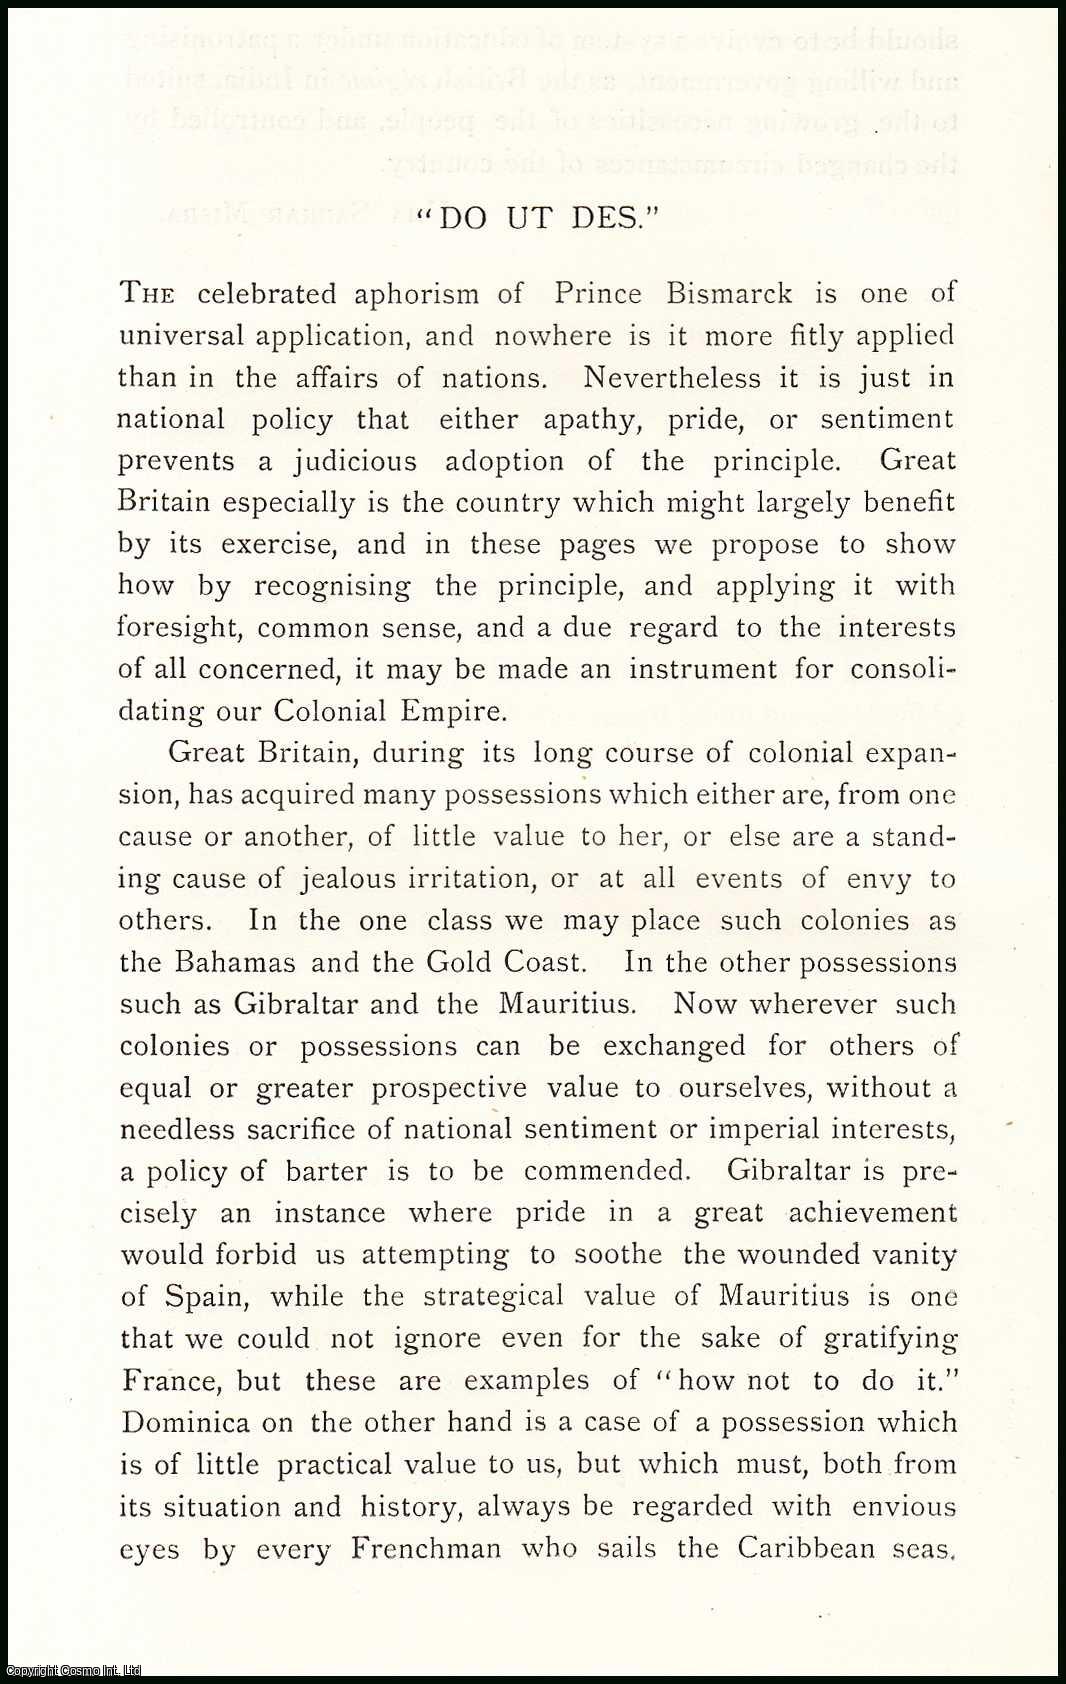 E.G.B. - Do ut Des : the usage of quid pro quo. An uncommon original article from The Asiatic Quarterly Review, 1890.